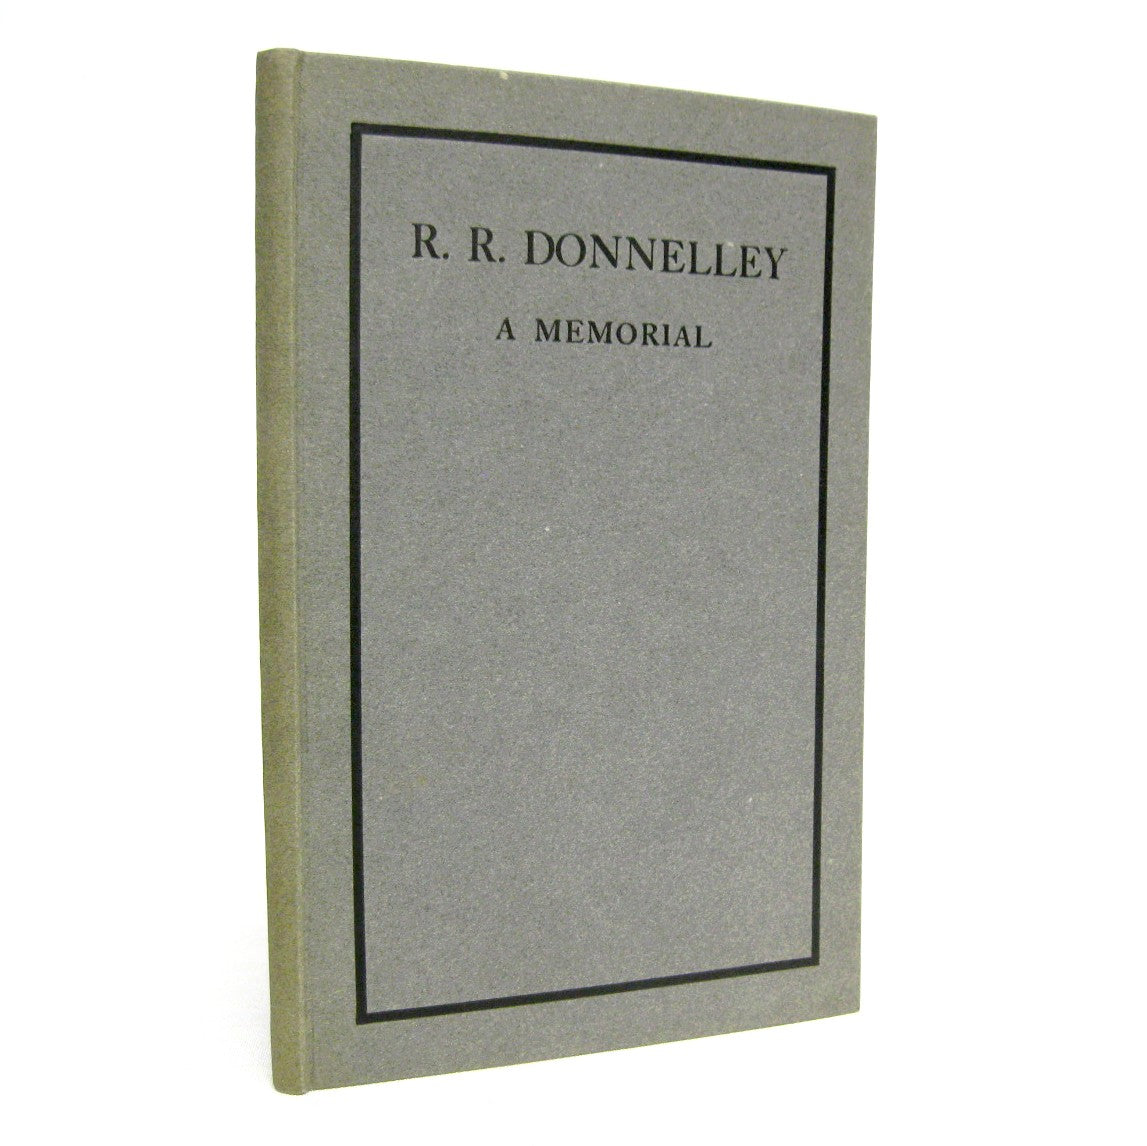 R.R. Donnelley a Memorial by the Chicago Typothetae